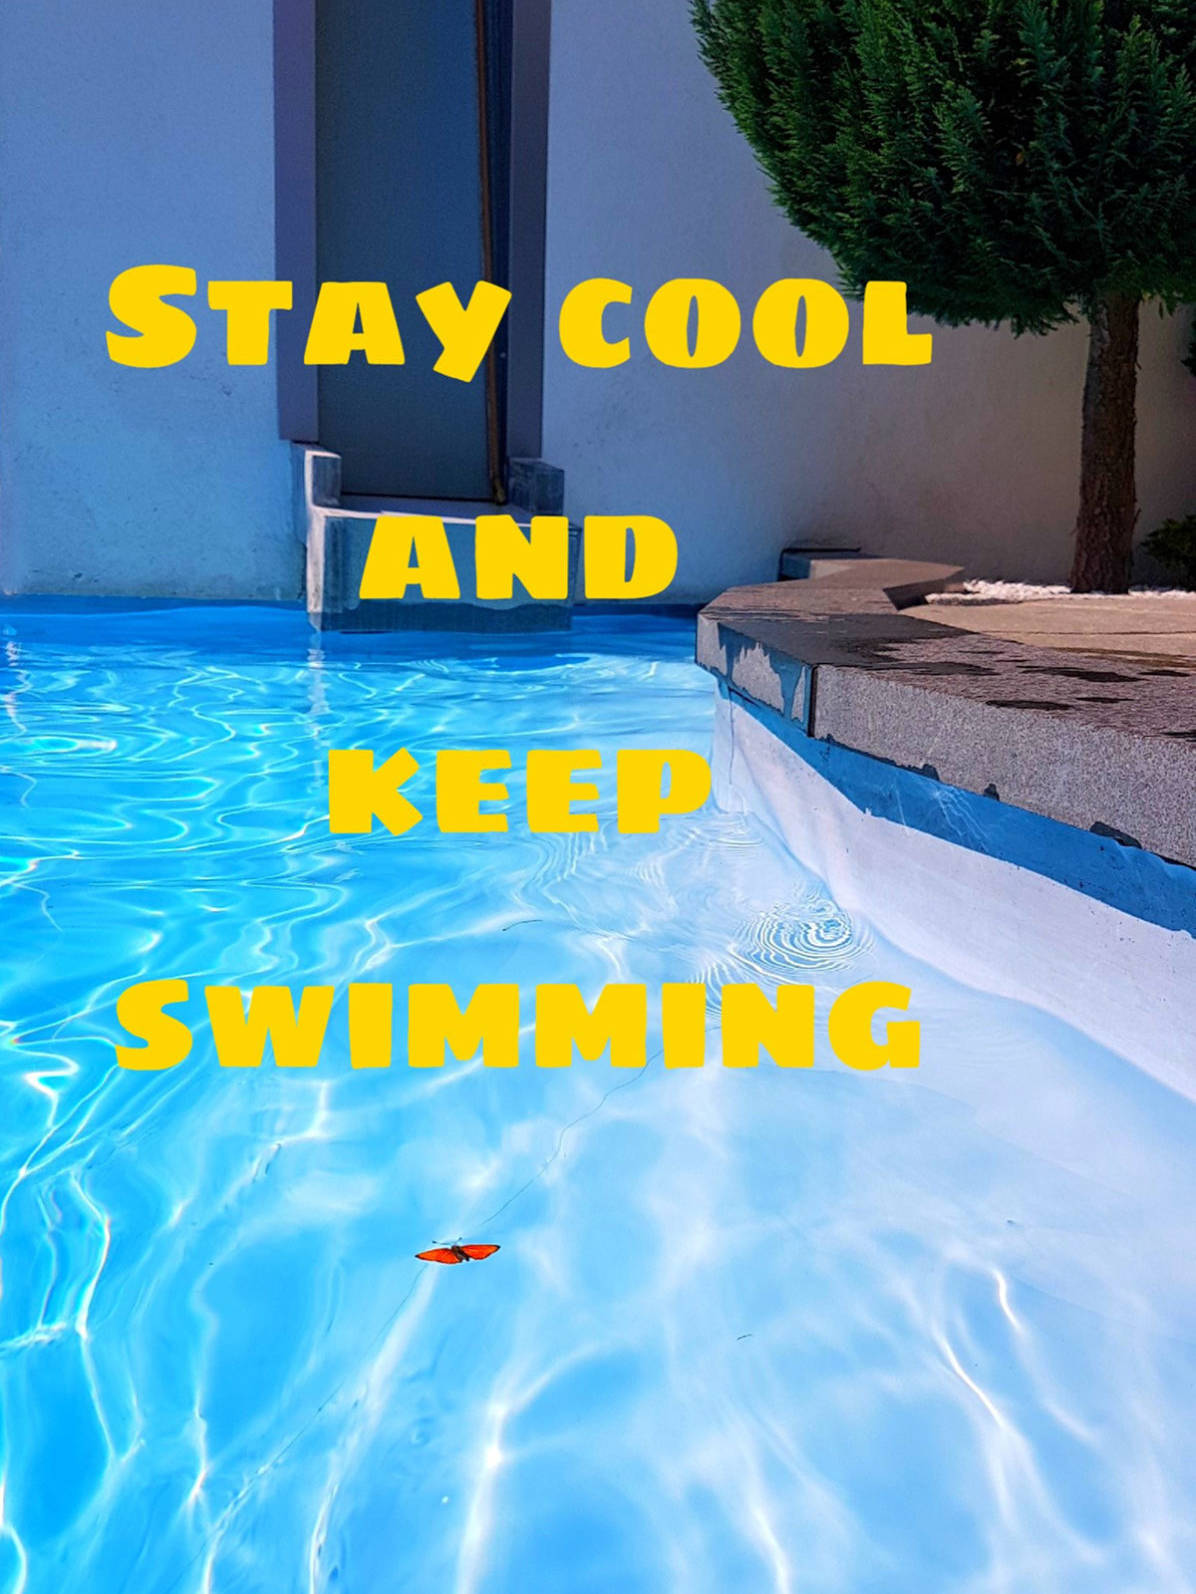 Stay cool and keep swimming